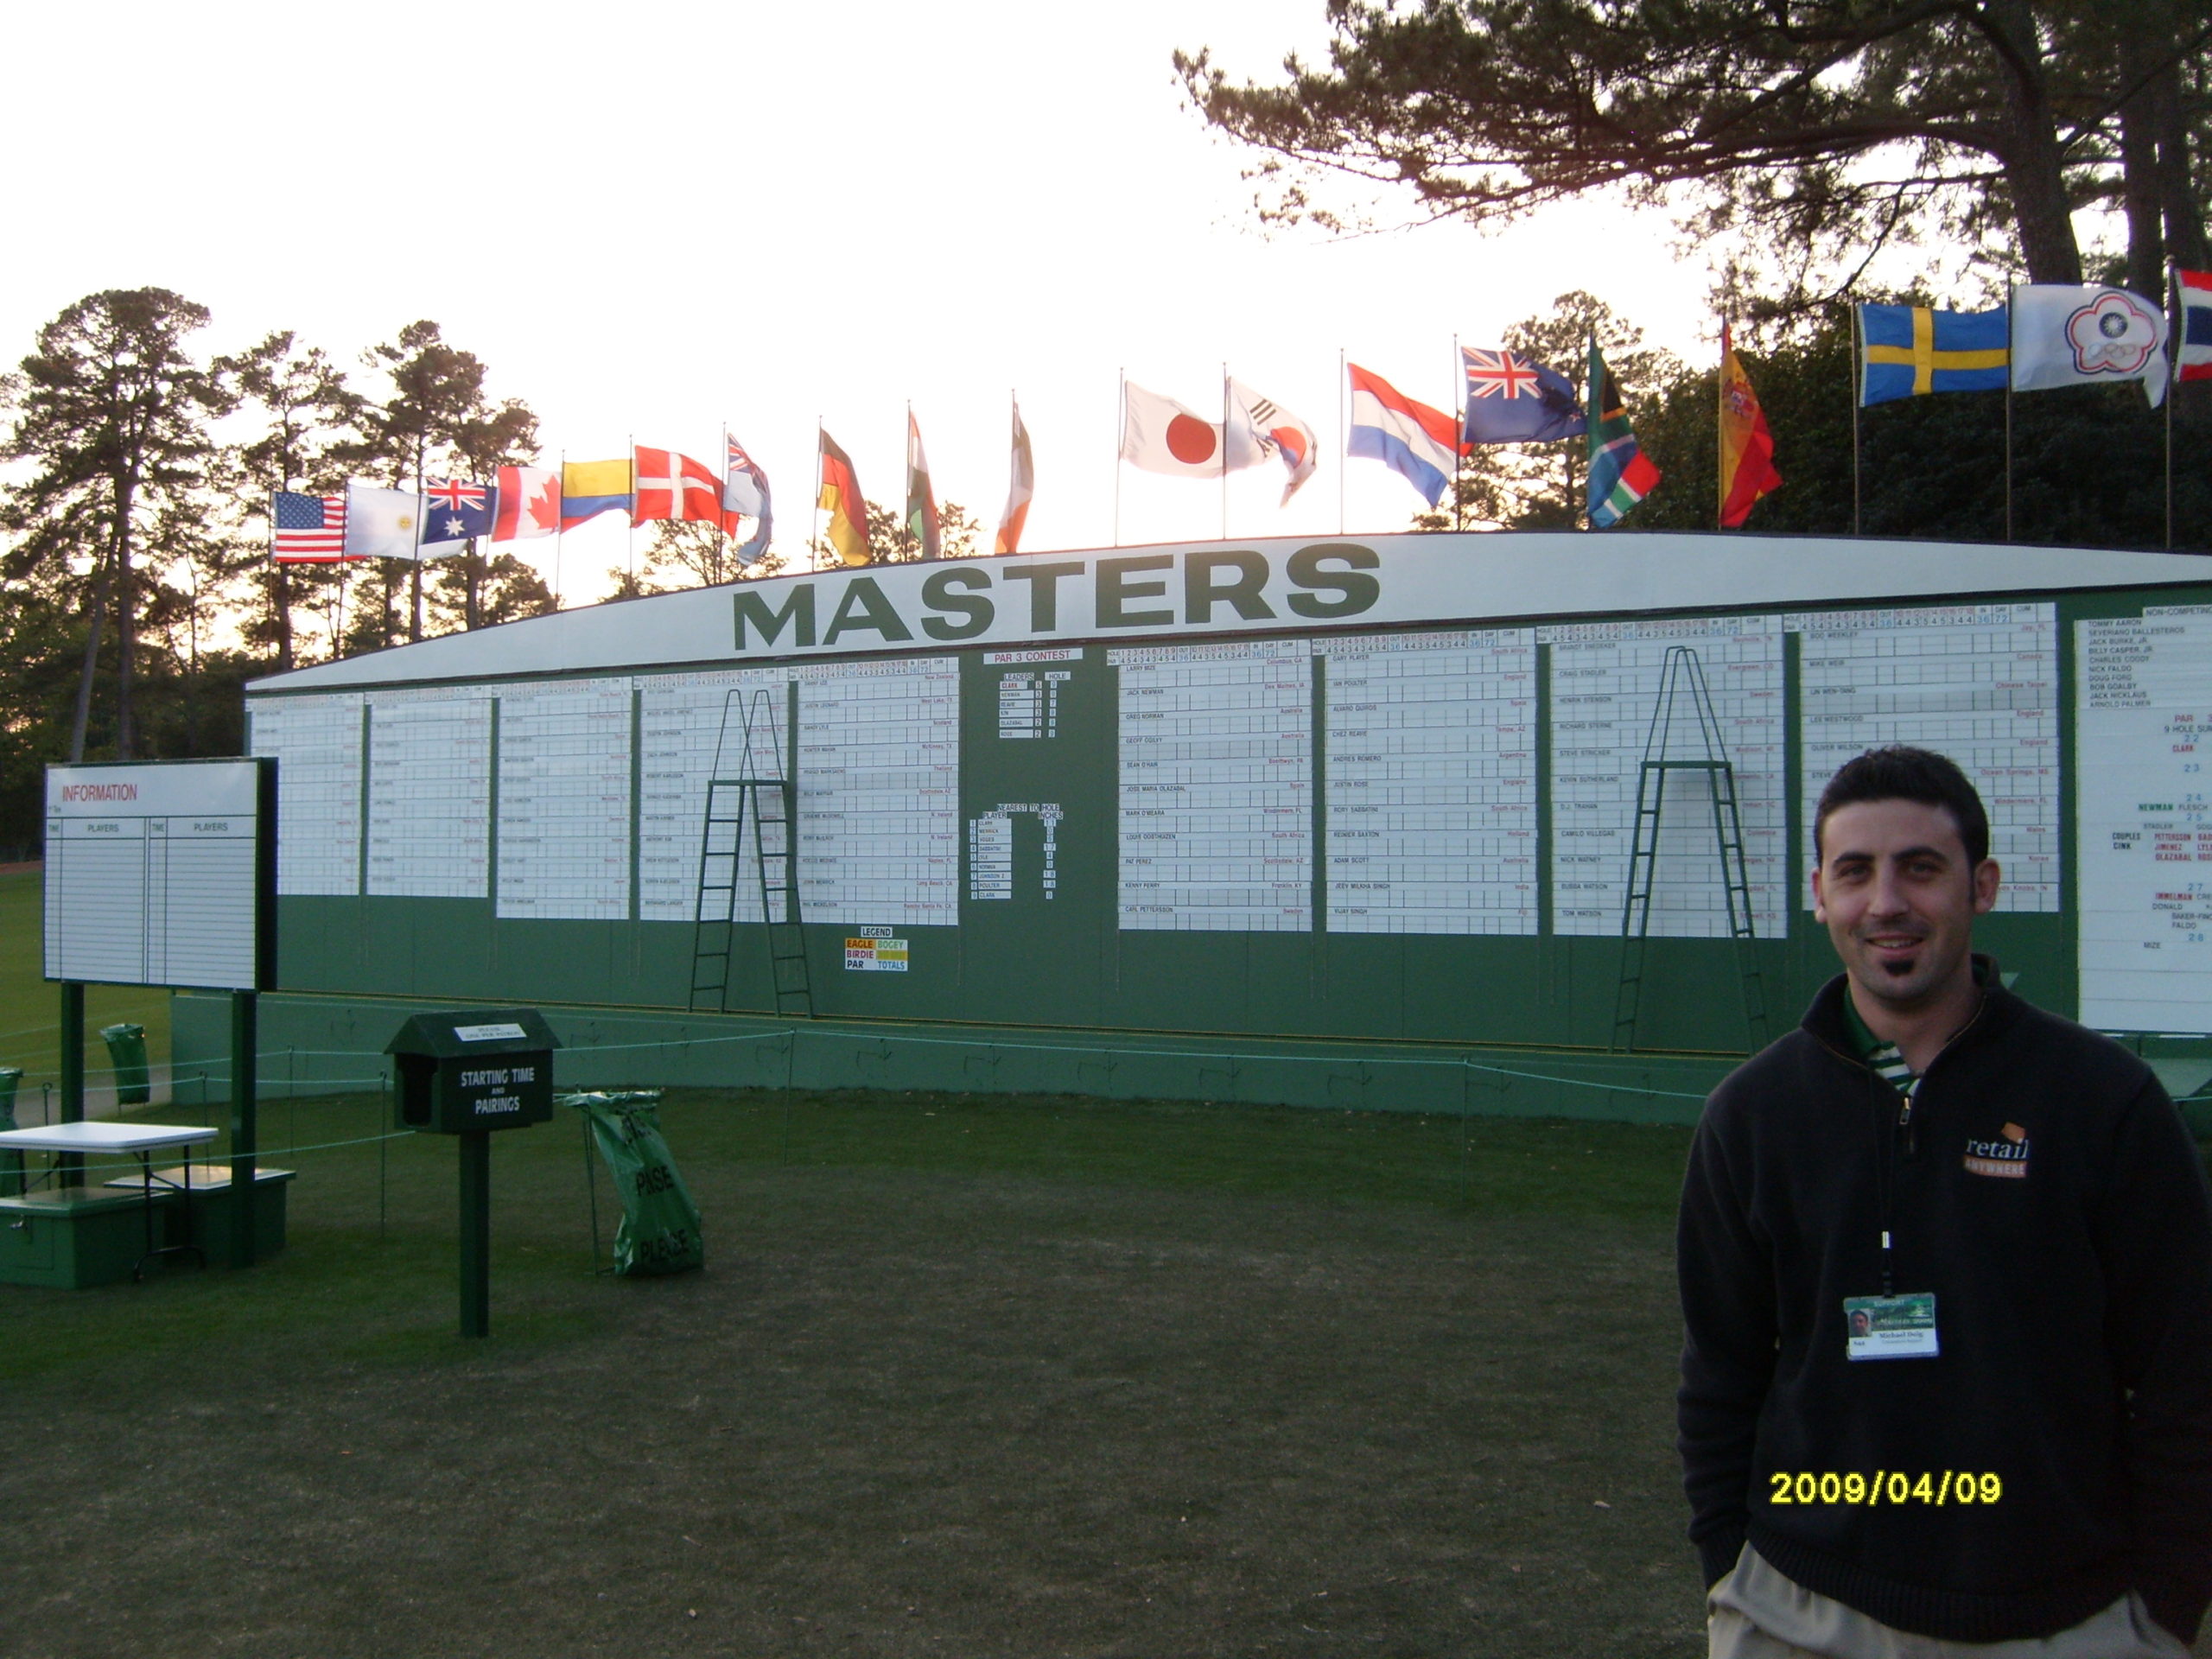 Michael Doig at the US Masters, 2009